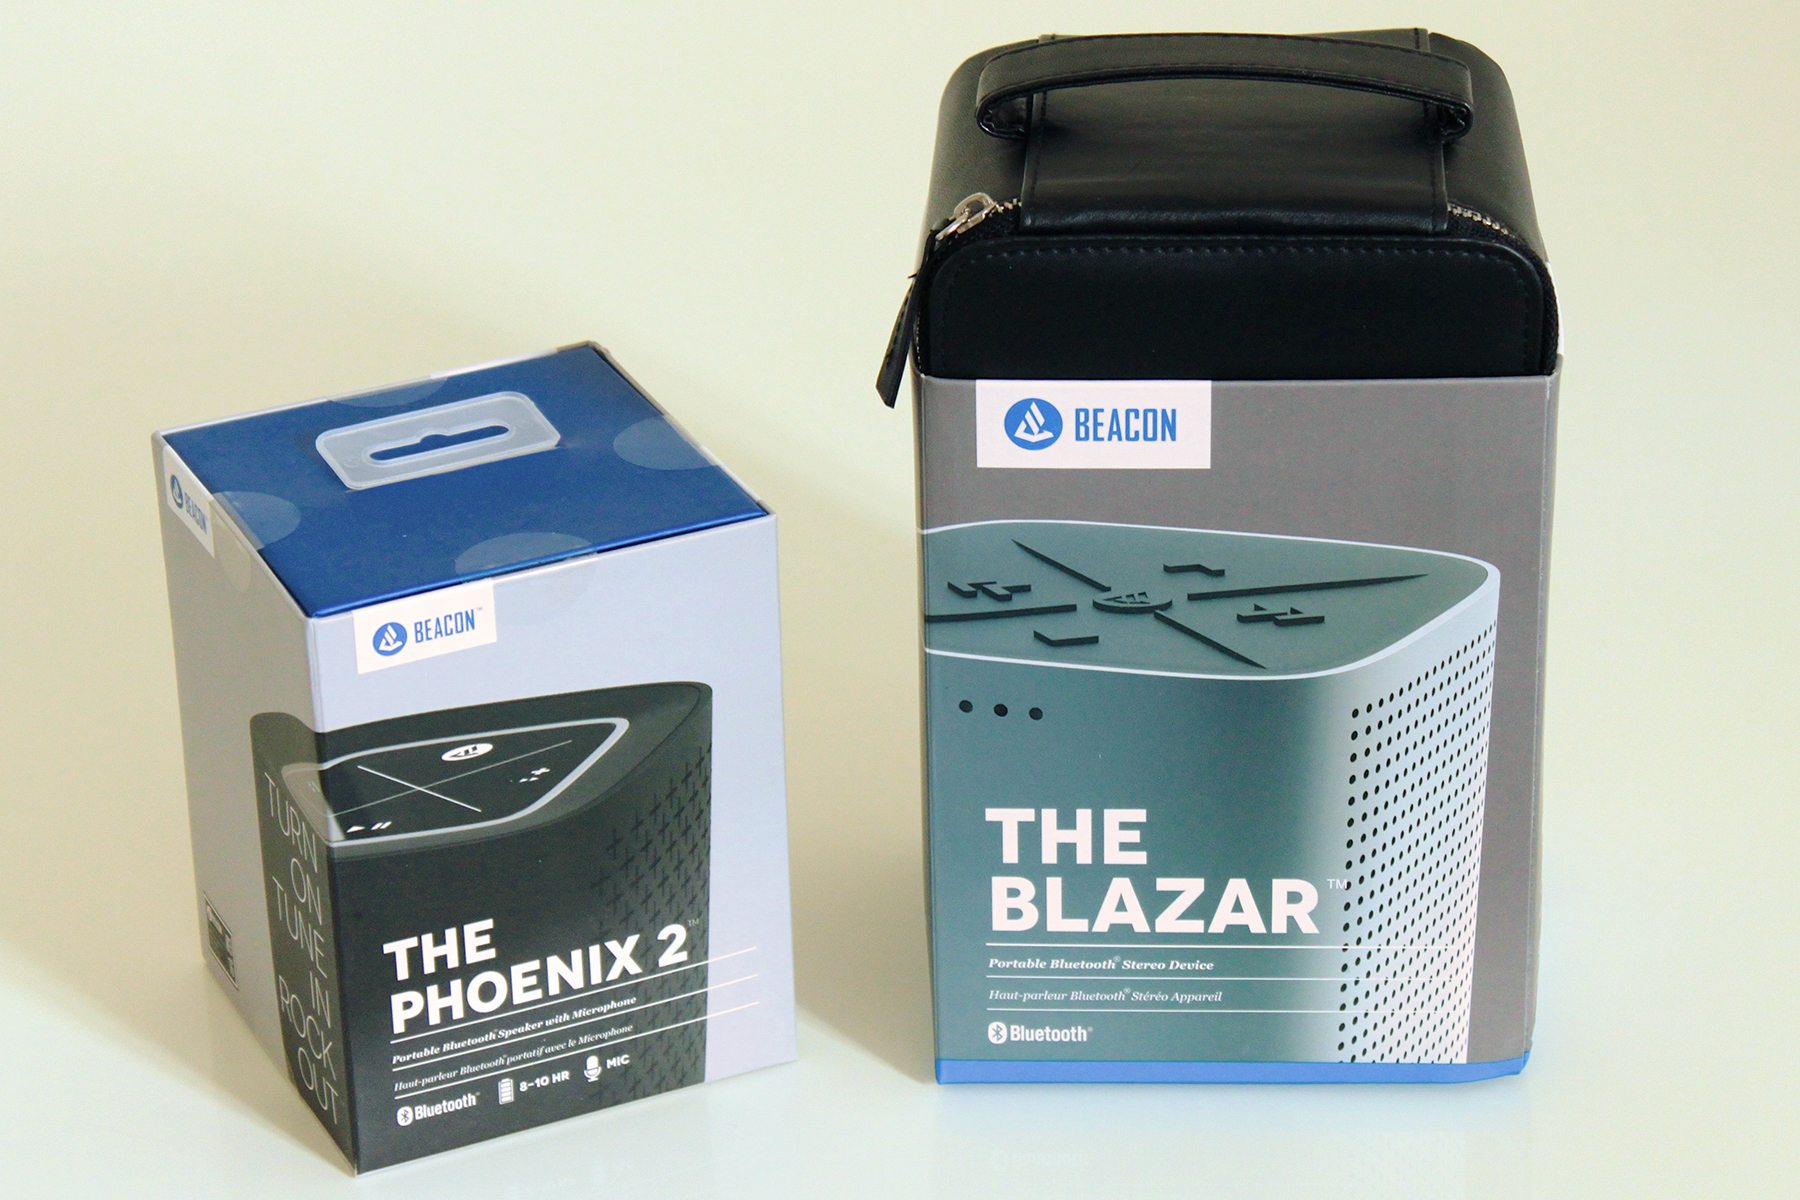 The Blazar and The Phoenix 2 from Beacon Audio